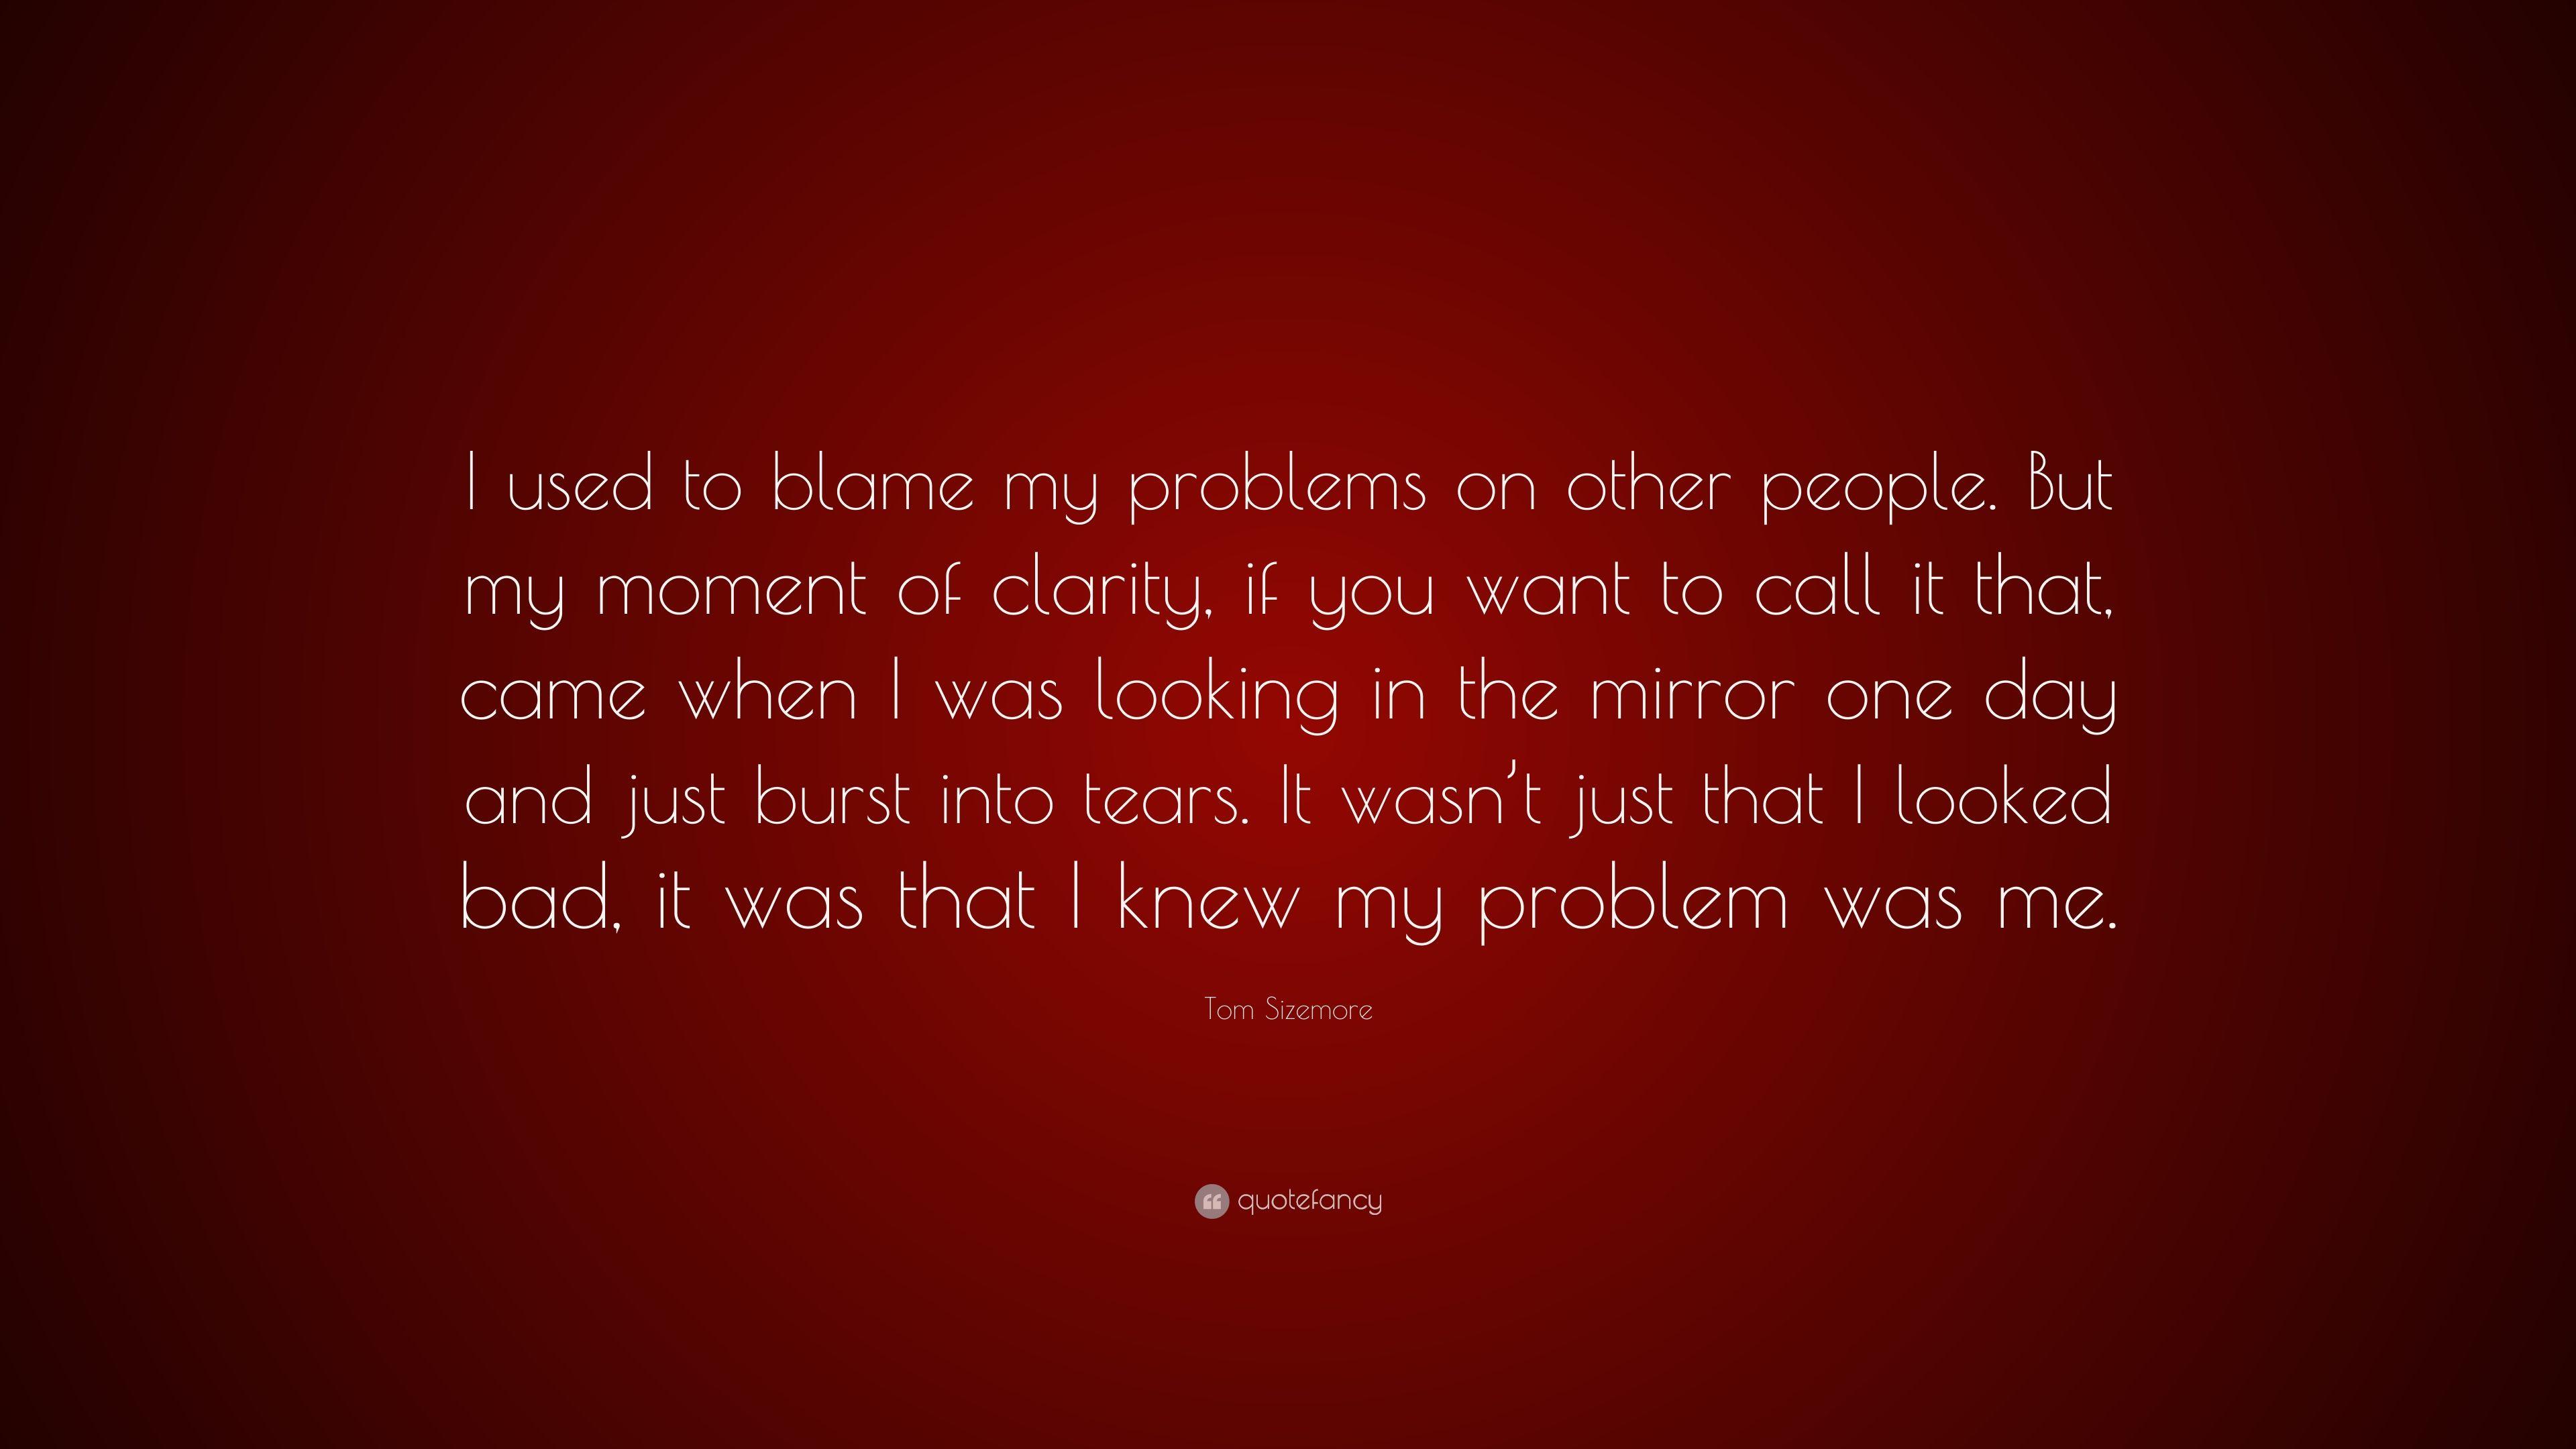 Tom Sizemore Quote: “I used to blame my problems on other people